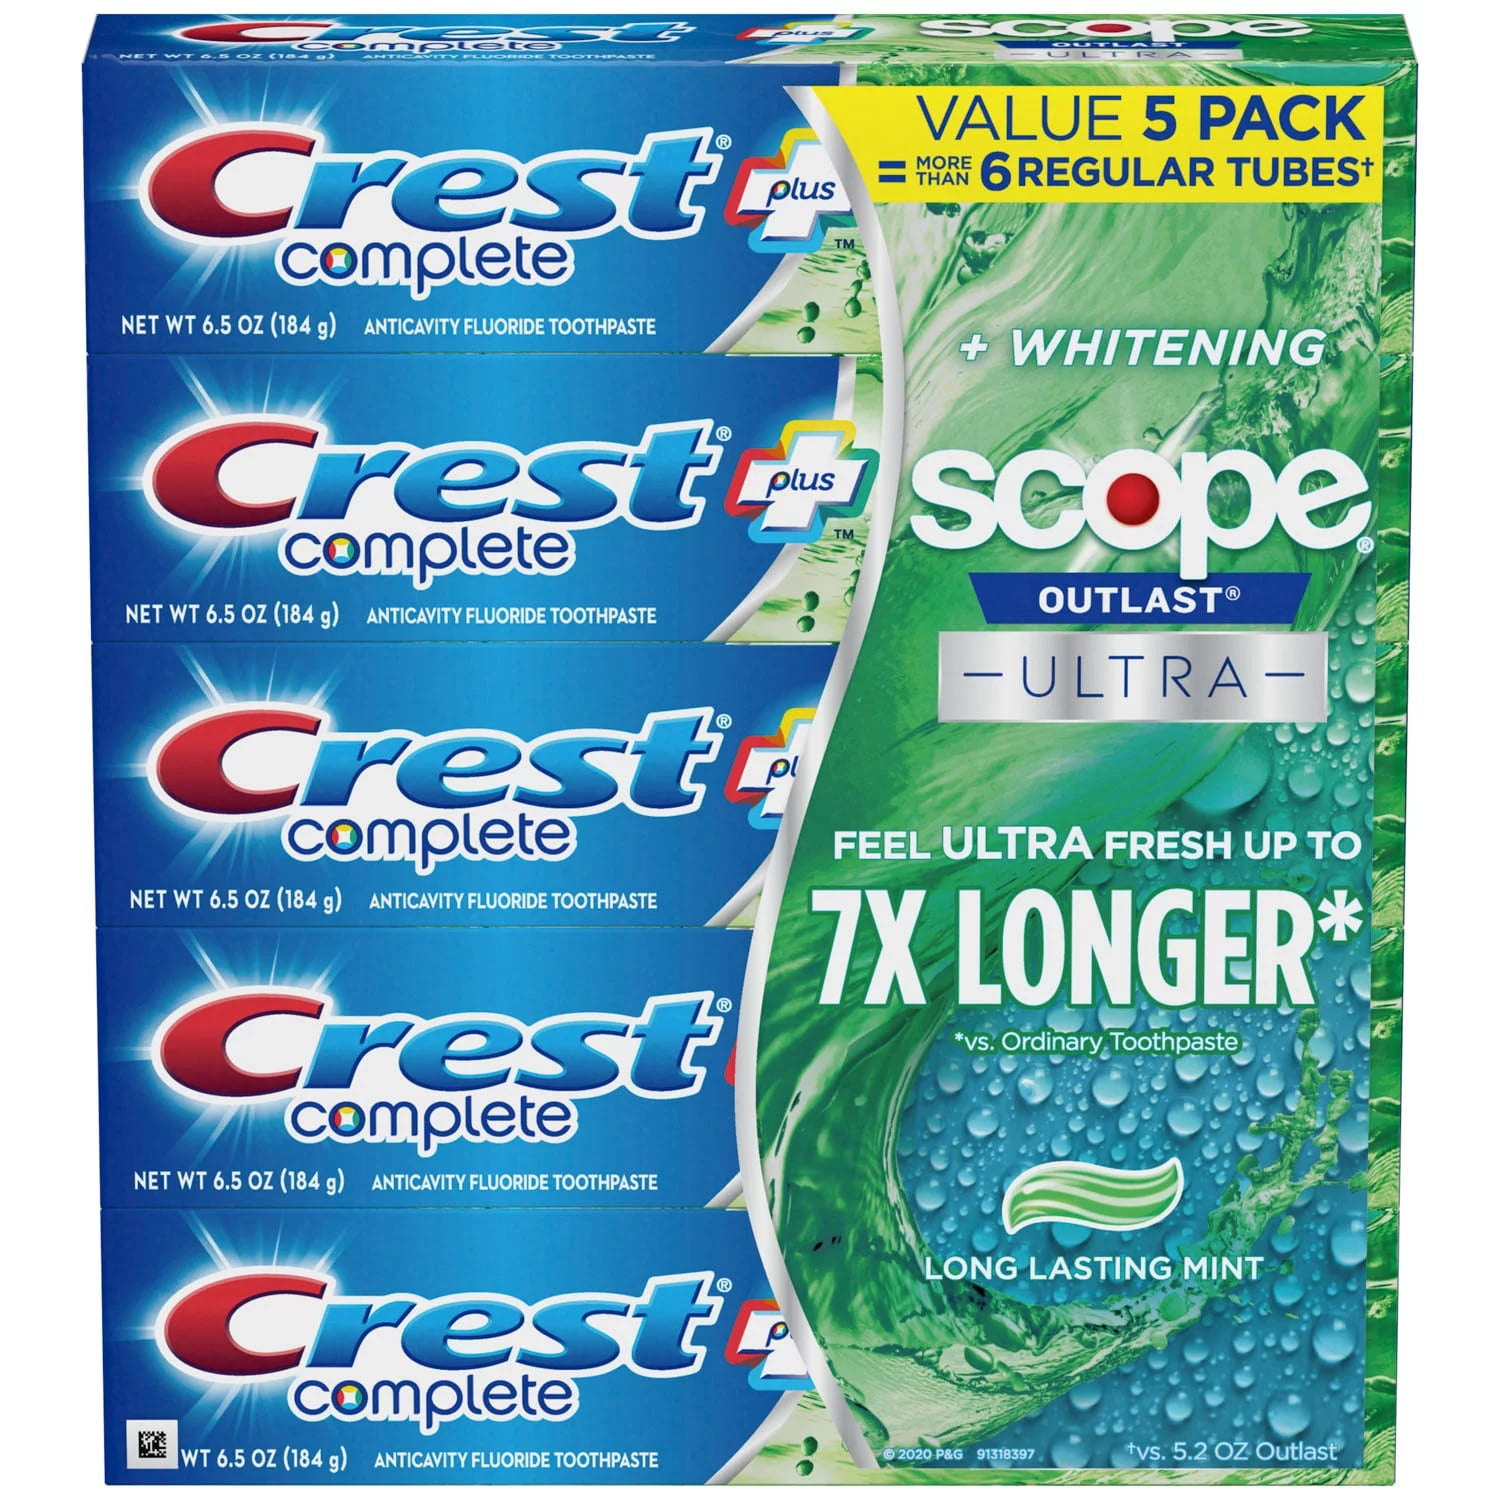 Crest Complete Whitening + Scope Toothpaste, 6.5 Ounce (5 Pack)